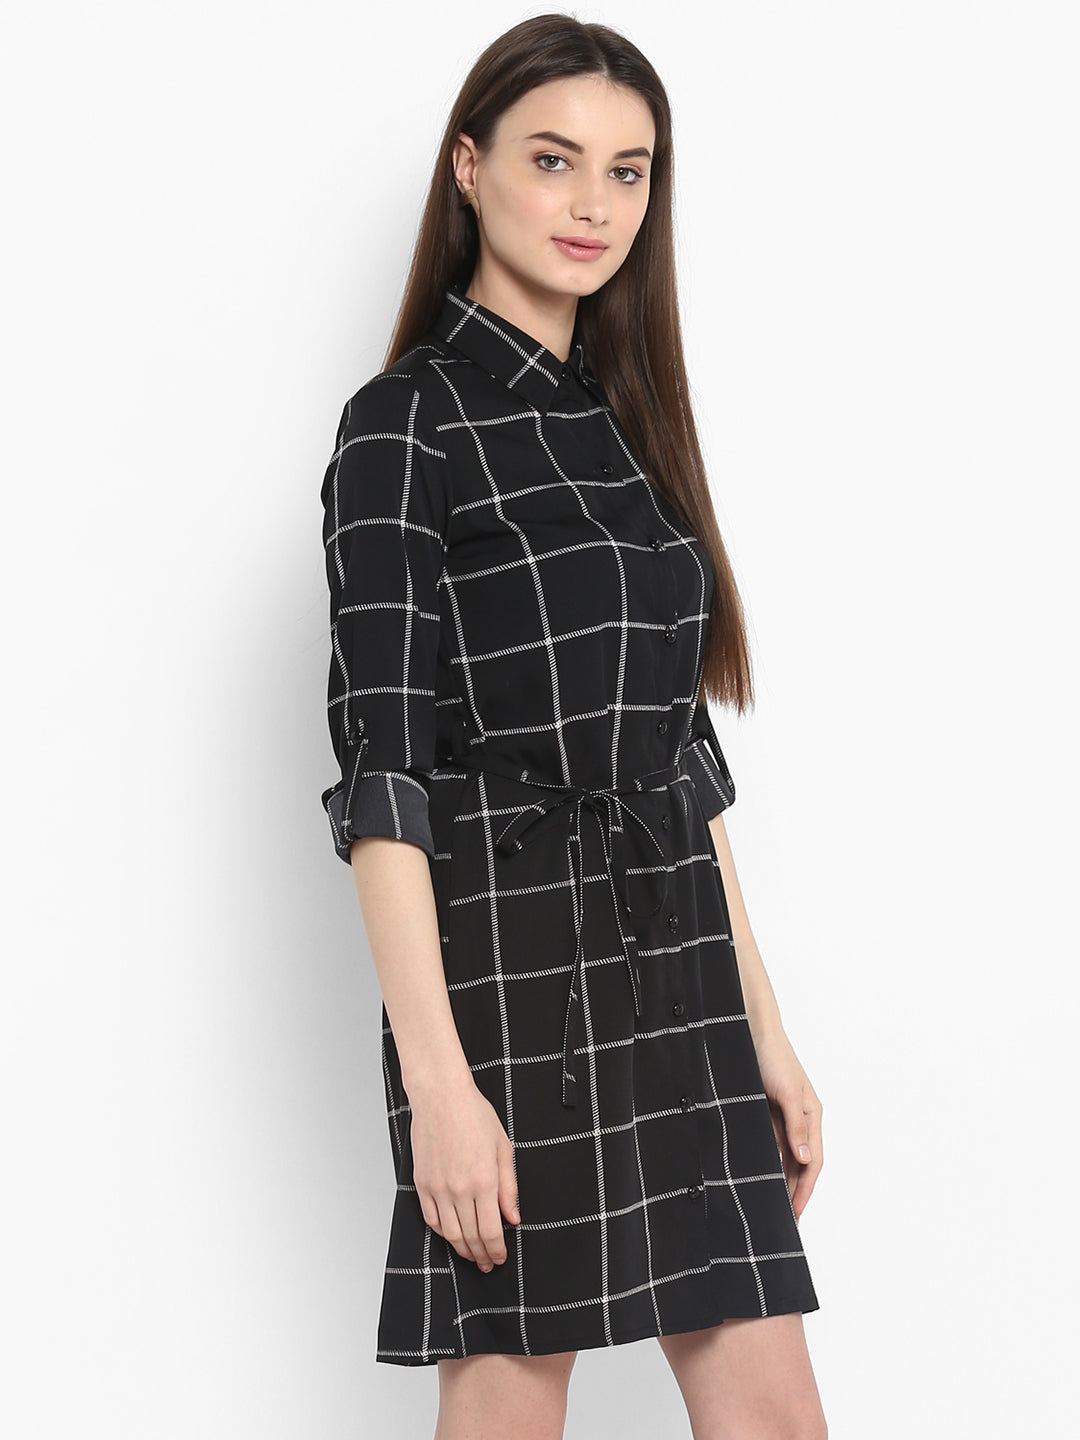 Women's Black and White Check Shirt Dress with Belt